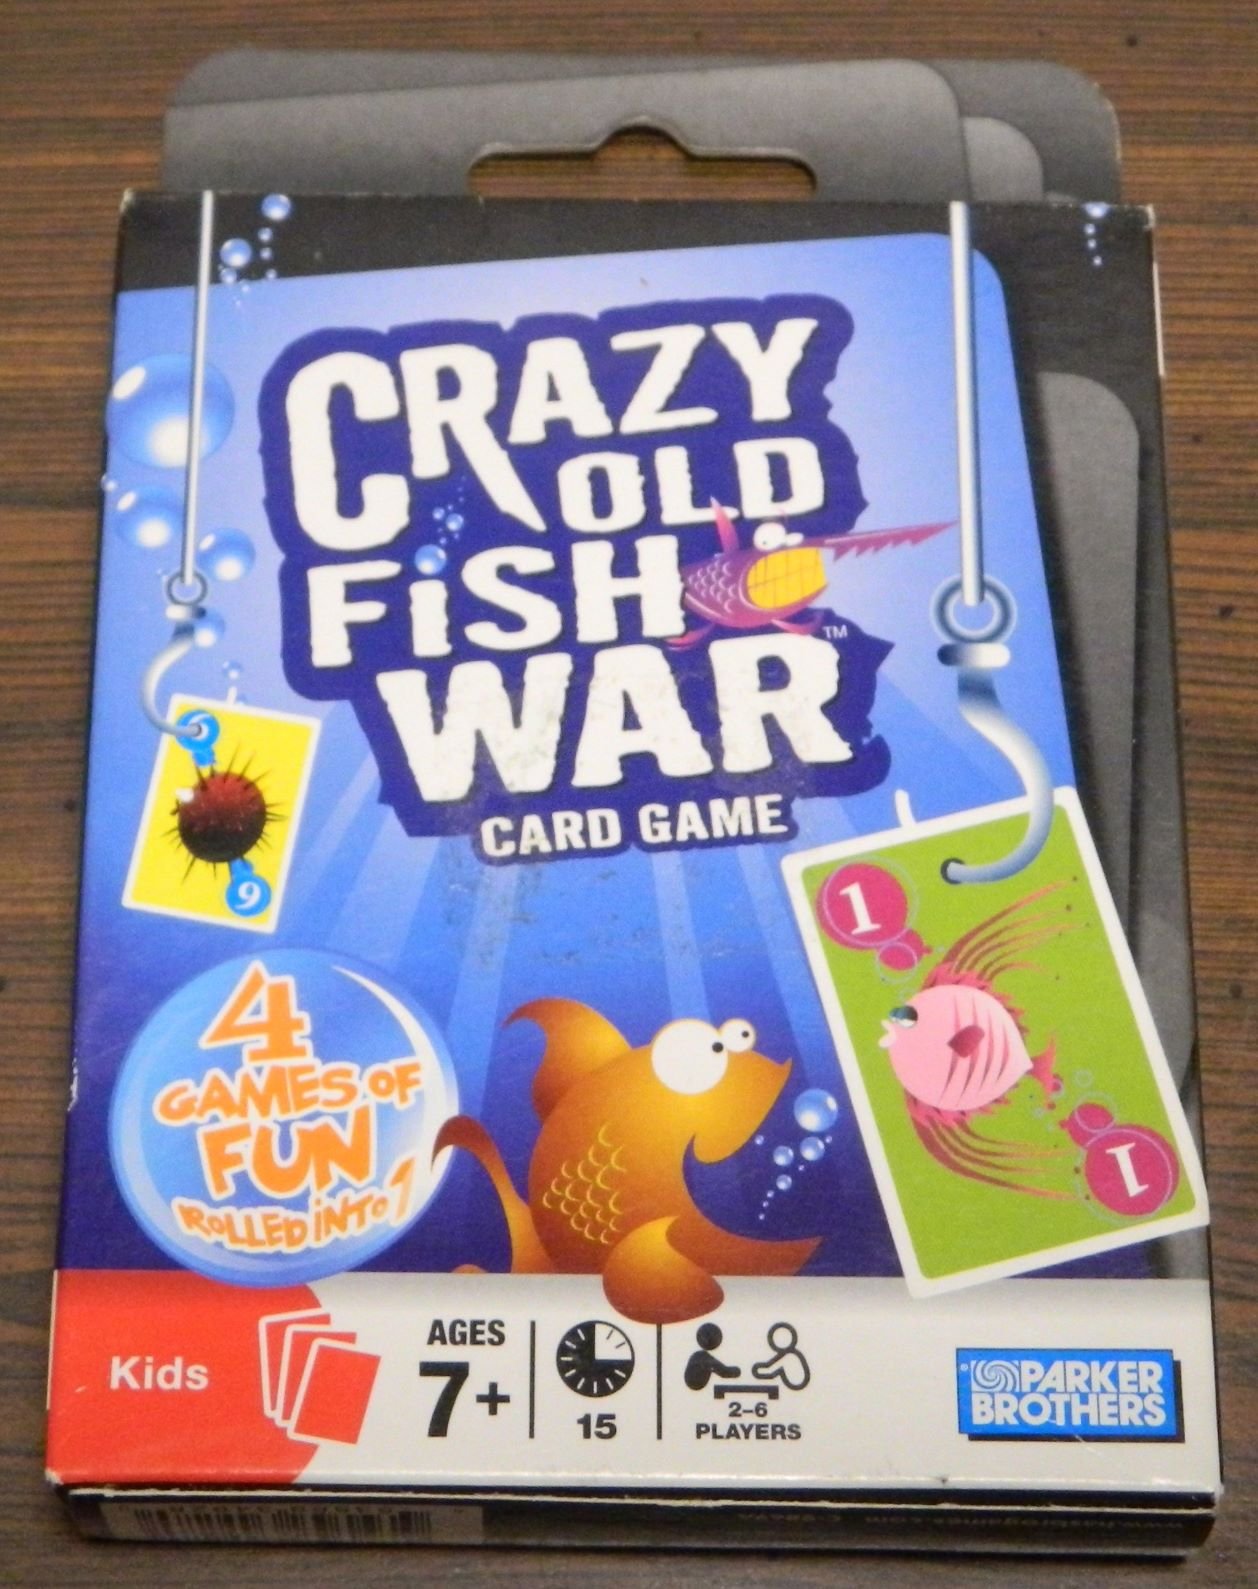 Crazy Old Fish War Card Game Review and Rules